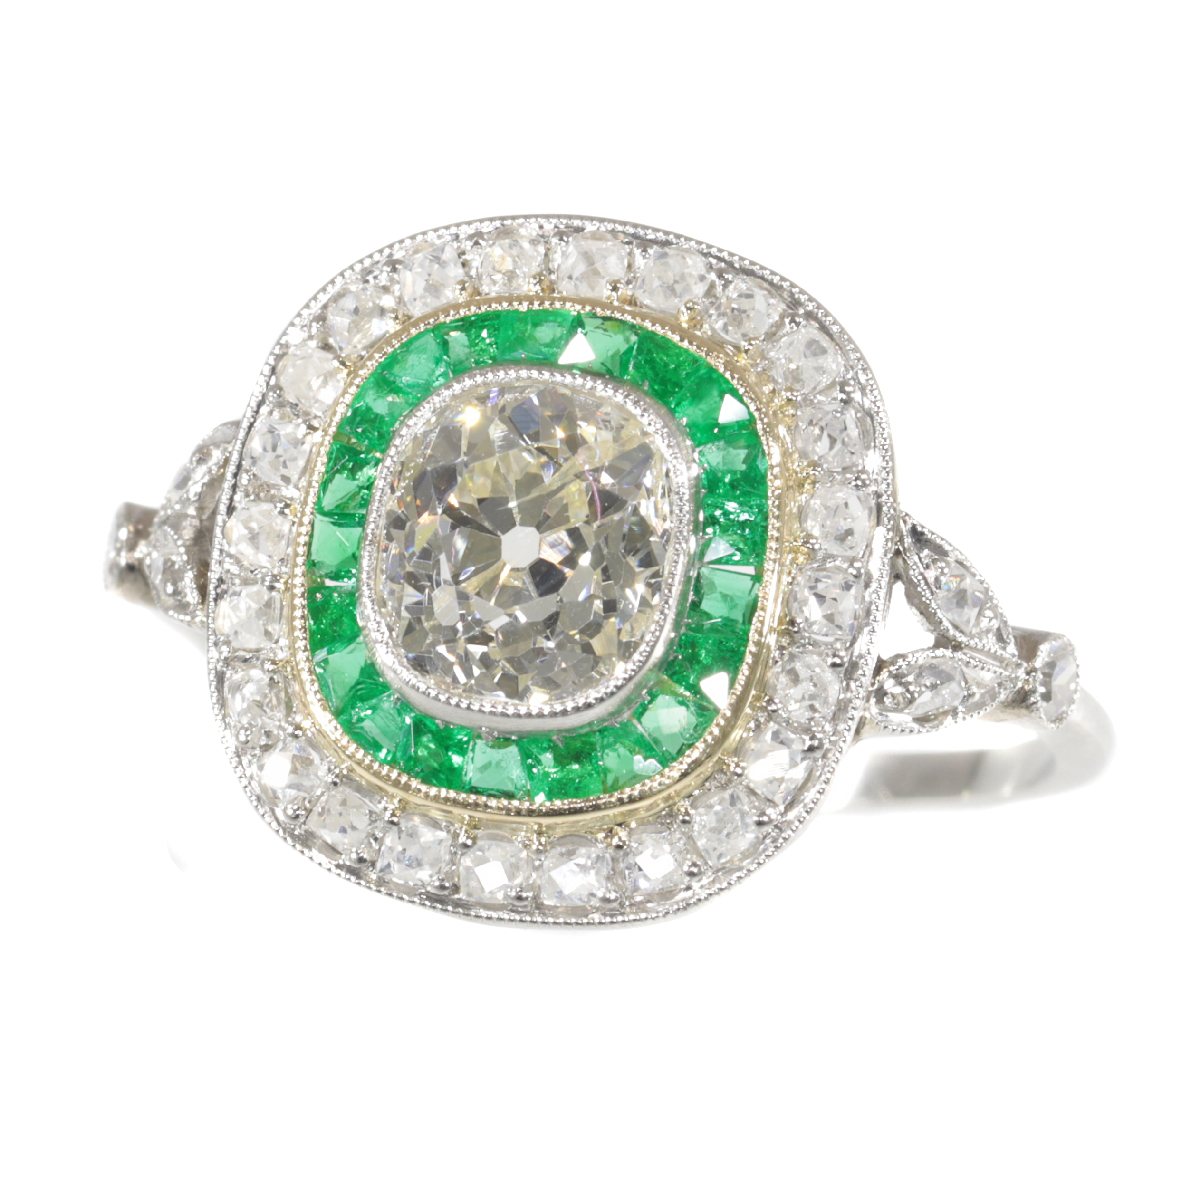 Vintage Art Deco style large diamond and emerald ring